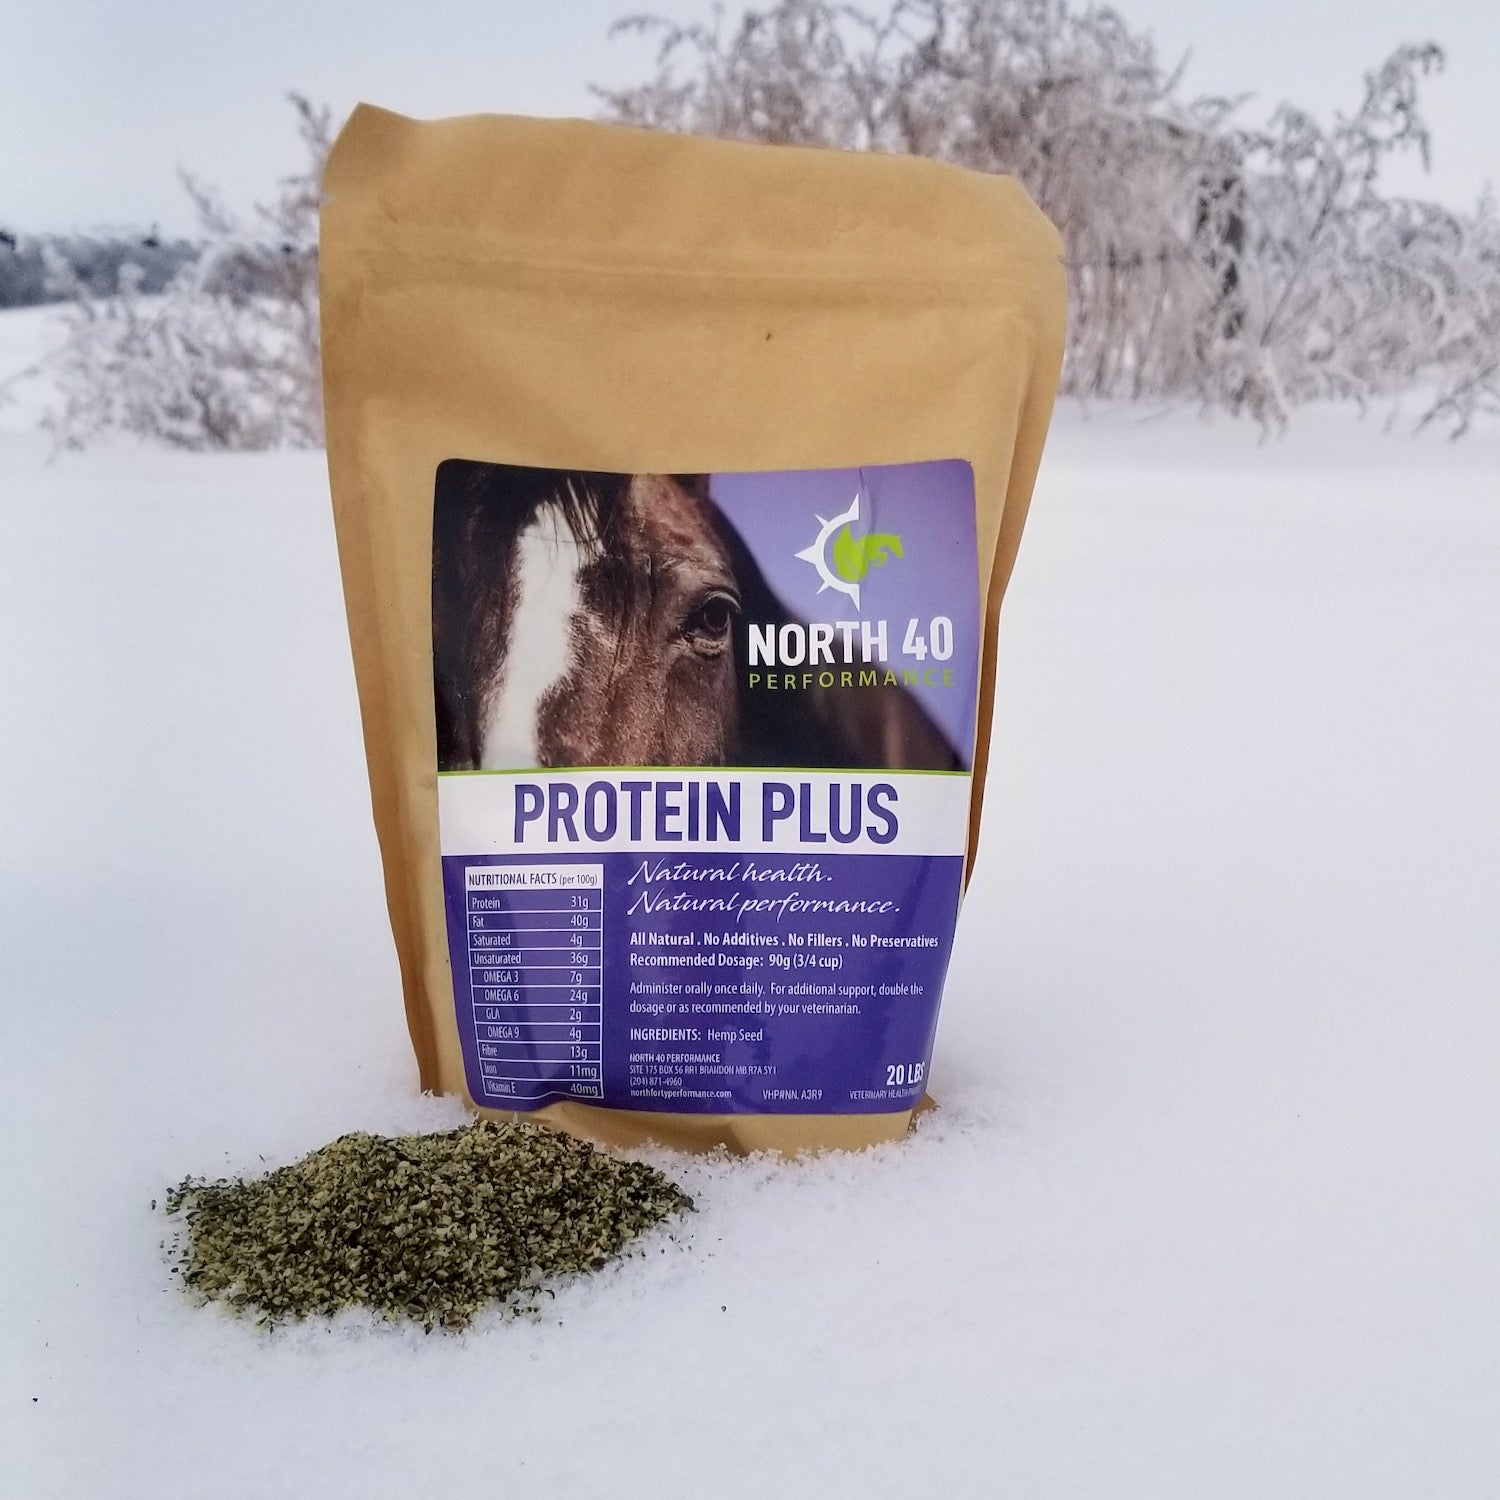 Protein Plus, a hemp seed product, comes in sample sized bags